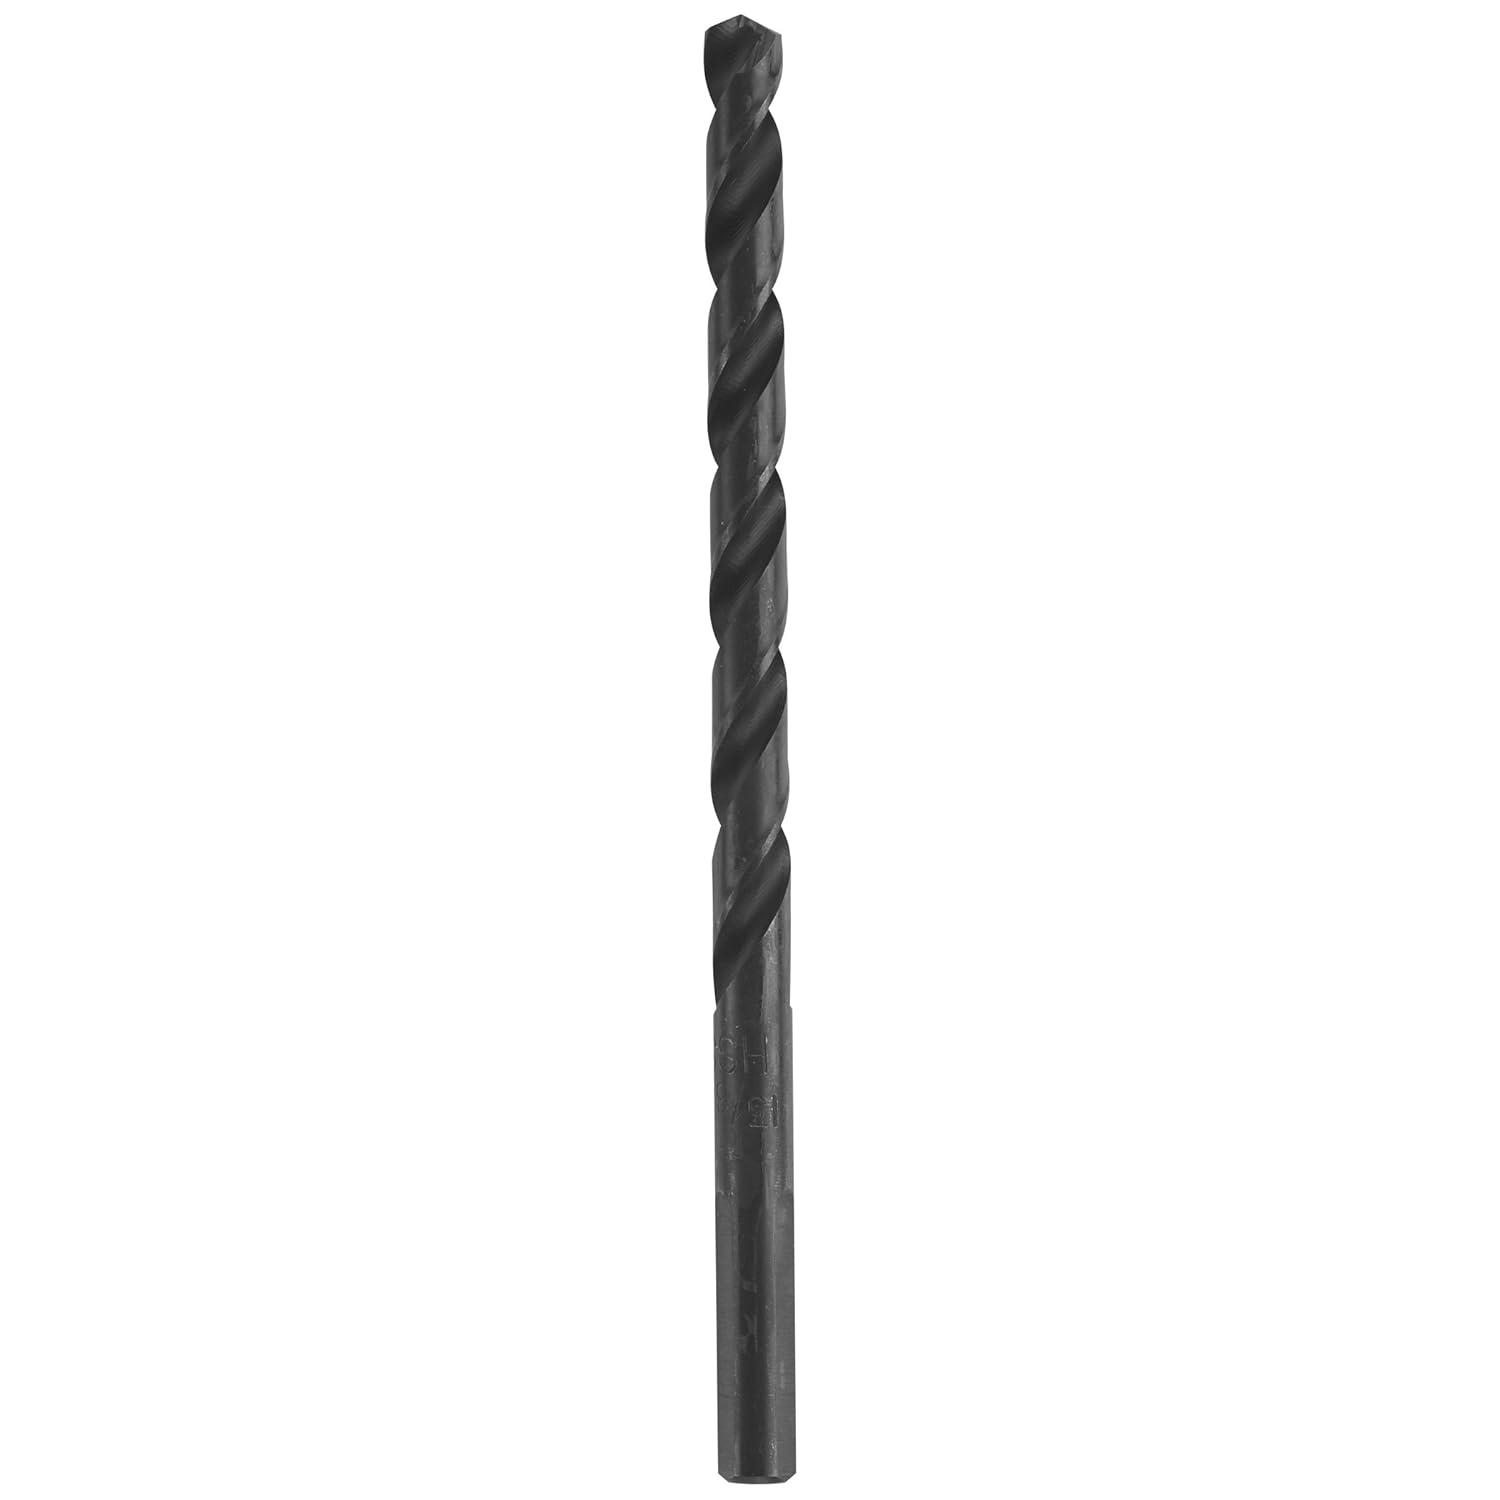 BOSCH Fractional Jobber Black Oxide Drill Bit (various sizes) $0.67 +Shipping is free w/ Prime or on $35+ orders